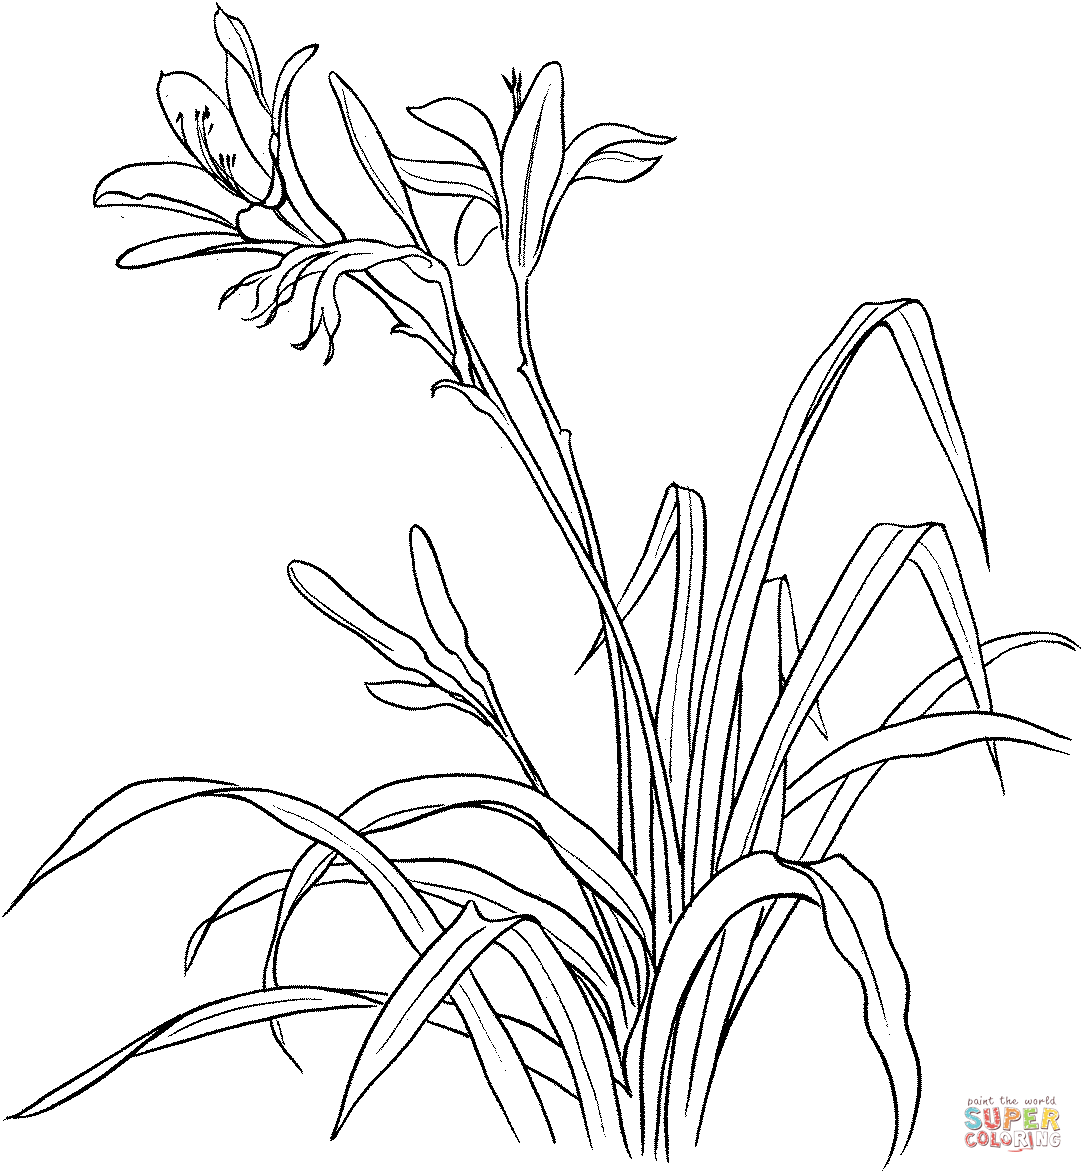 Tiger Lily coloring #2, Download drawings